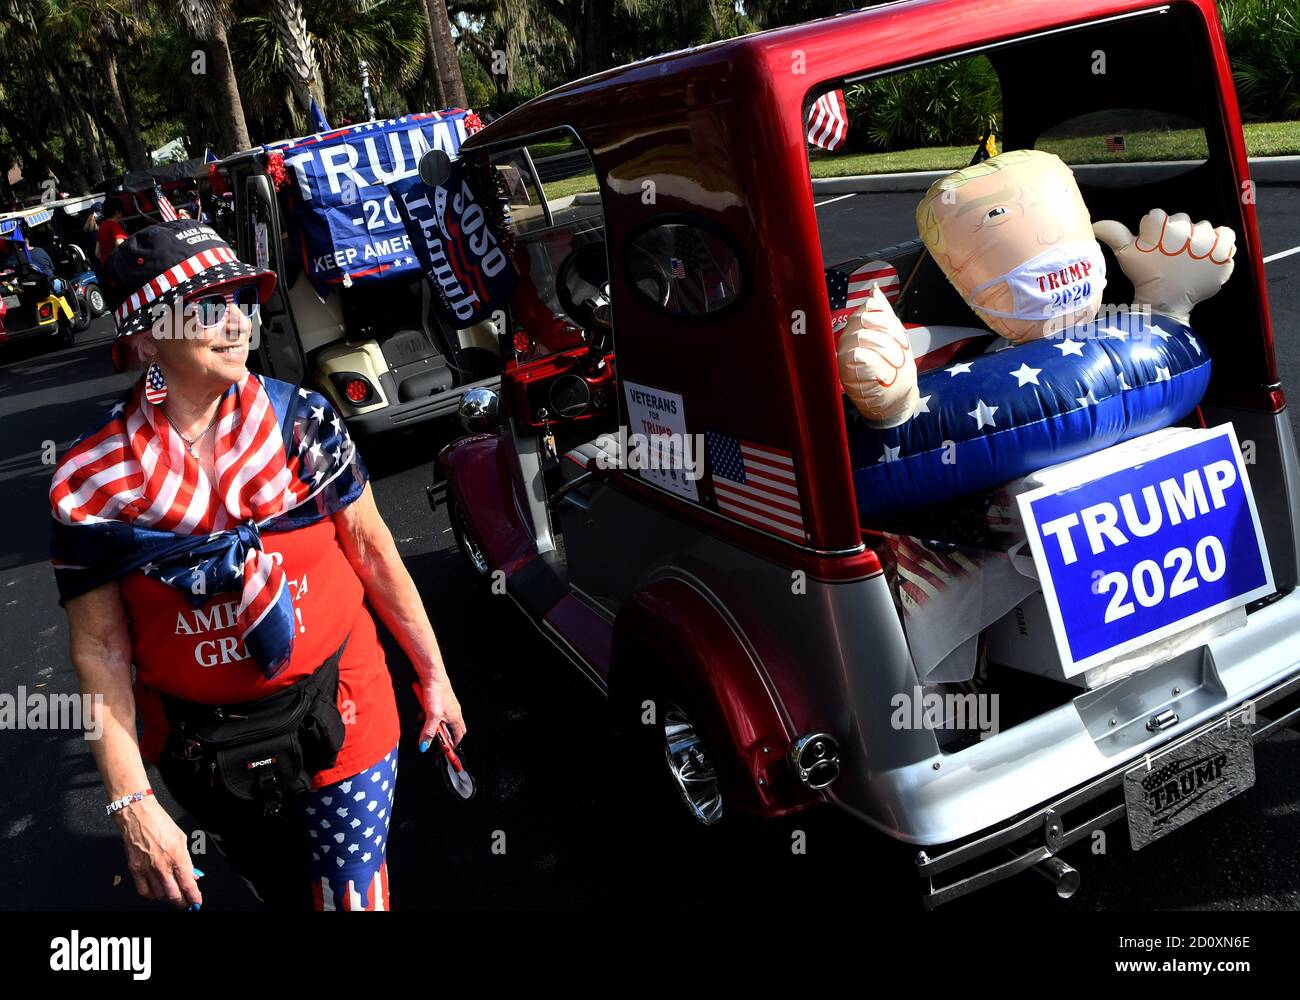 October 3, 2020 - The Villages, Florida, United States - Residents queue up to participate in a golf cart parade in support of the re-election of U.S. President Donald Trump on October 3, 2020 in The Villages, Florida, a retirement community north of Orlando. Trump was admitted to Walter Reed Hospital yesterday after contracting COVID-19. (Paul Hennessy/Alamy Live News) Stock Photo